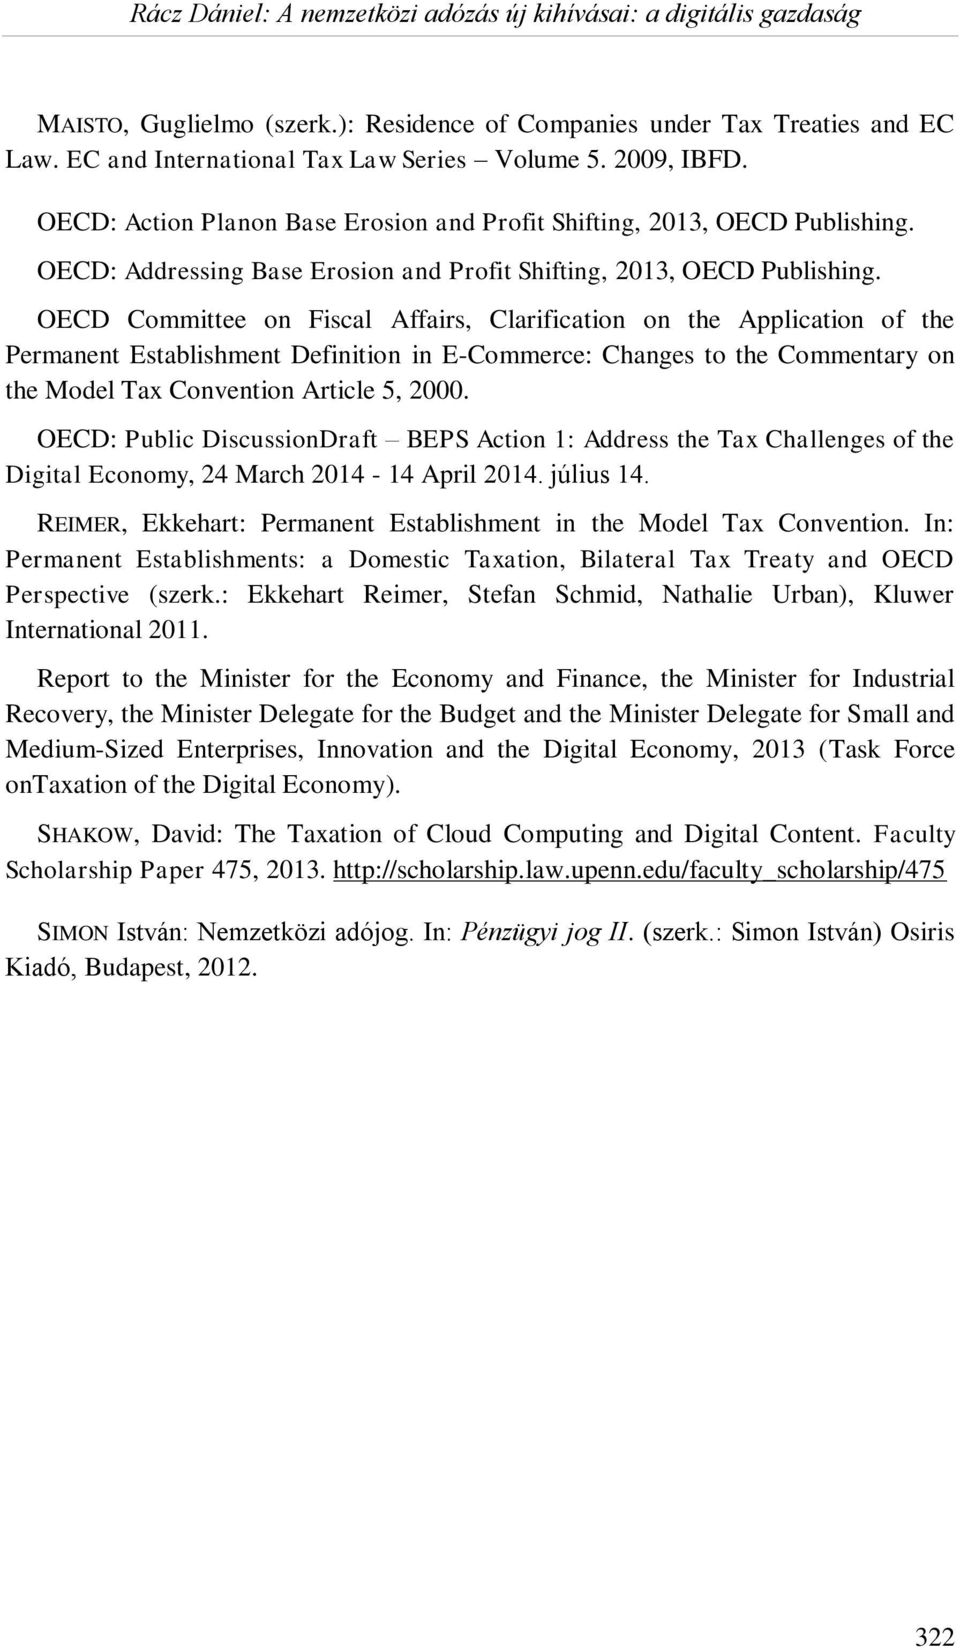 OECD Committee on Fiscal Affairs, Clarification on the Application of the Permanent Establishment Definition in E-Commerce: Changes to the Commentary on the Model Tax Convention Article 5, 2000.